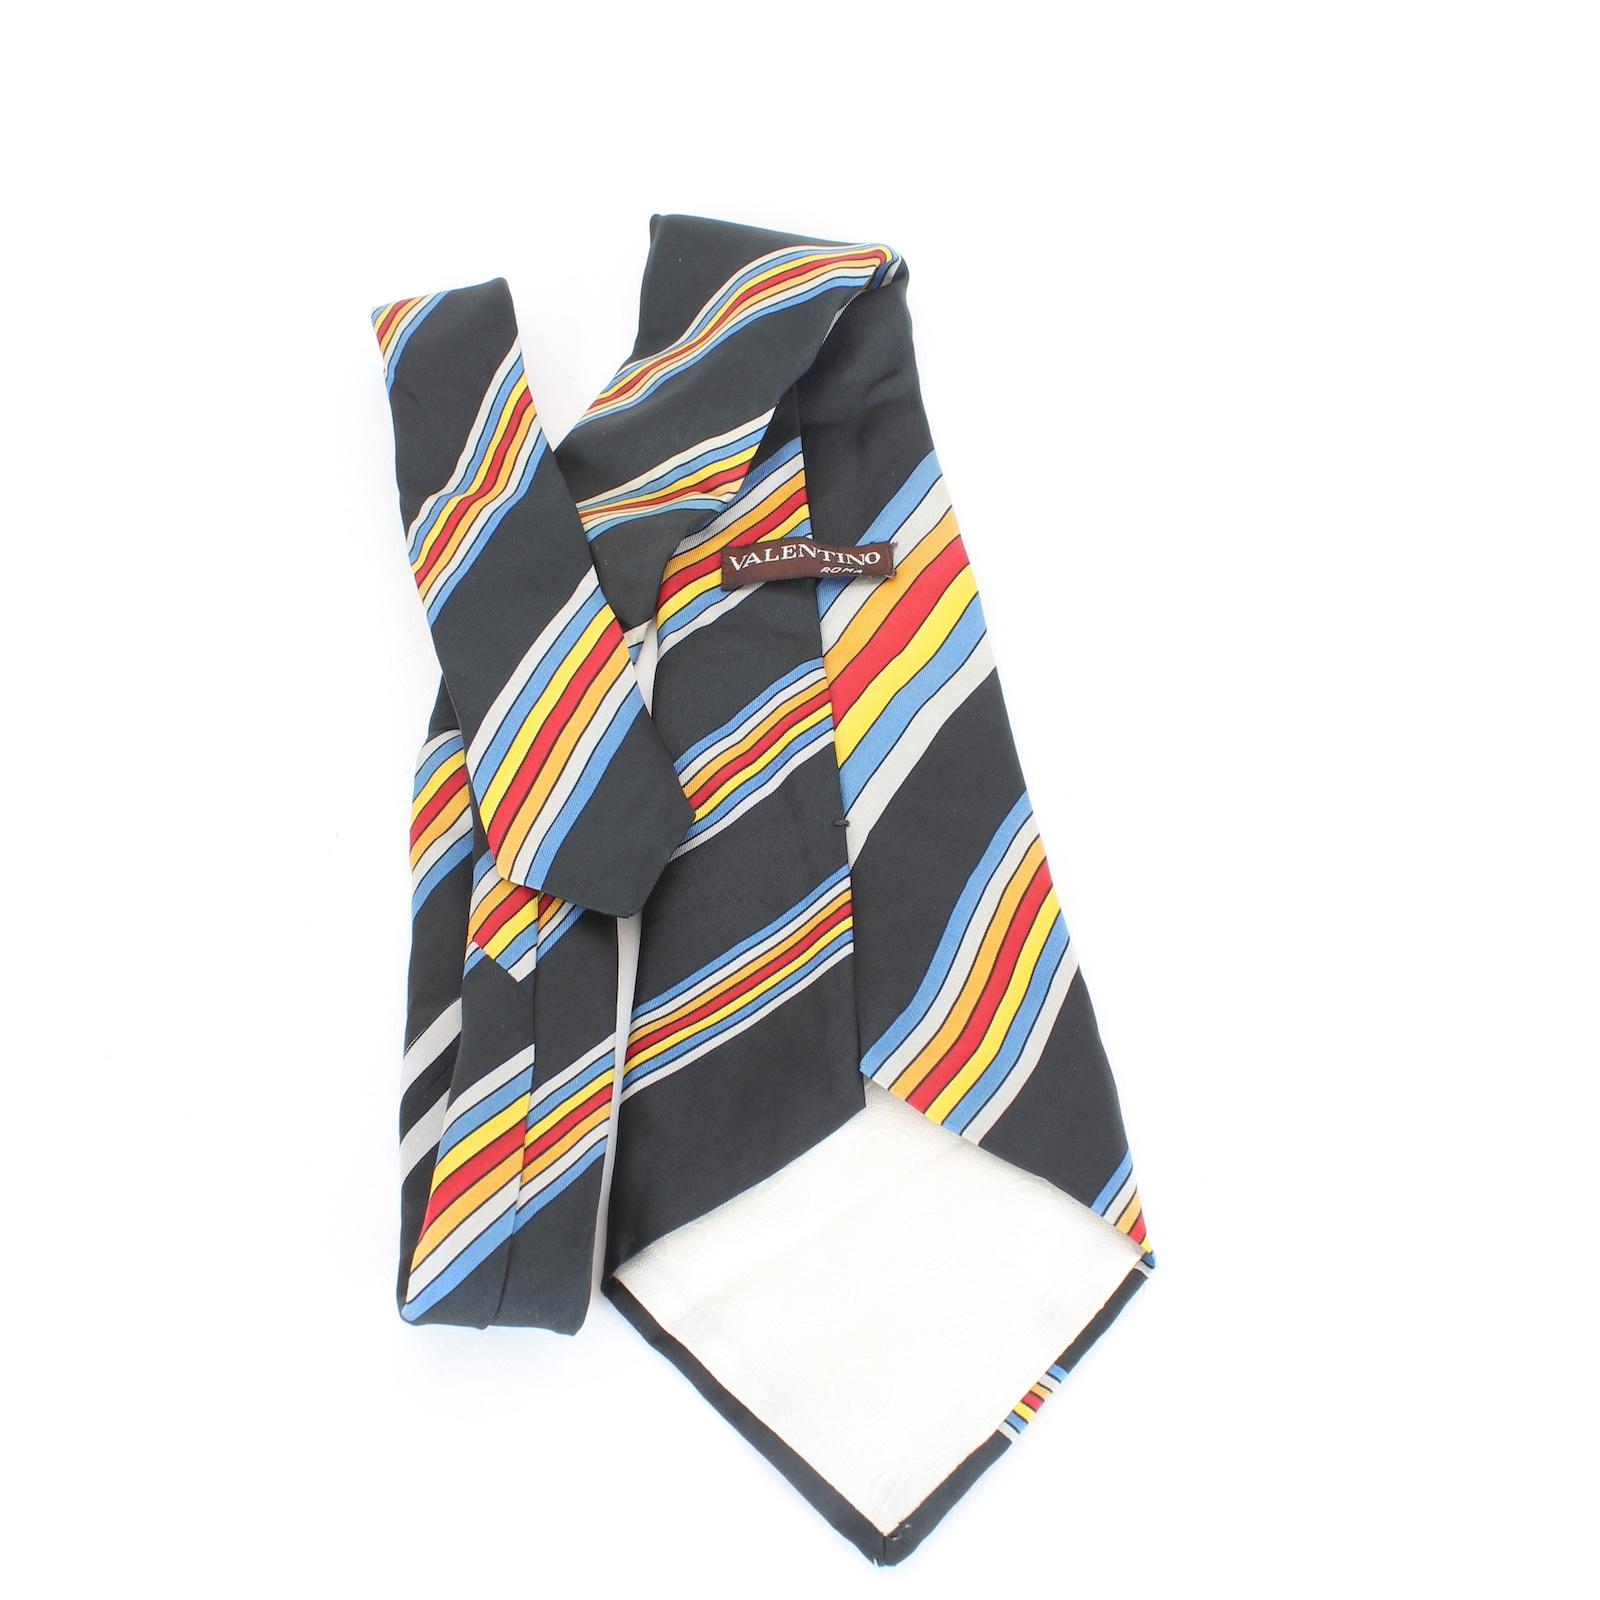 Valentino vintage 90s tie. Black background color with red, blue and yellow striped pattern, 100% silk. Made in italy.

Length: 137 cm
Width: 13 cm